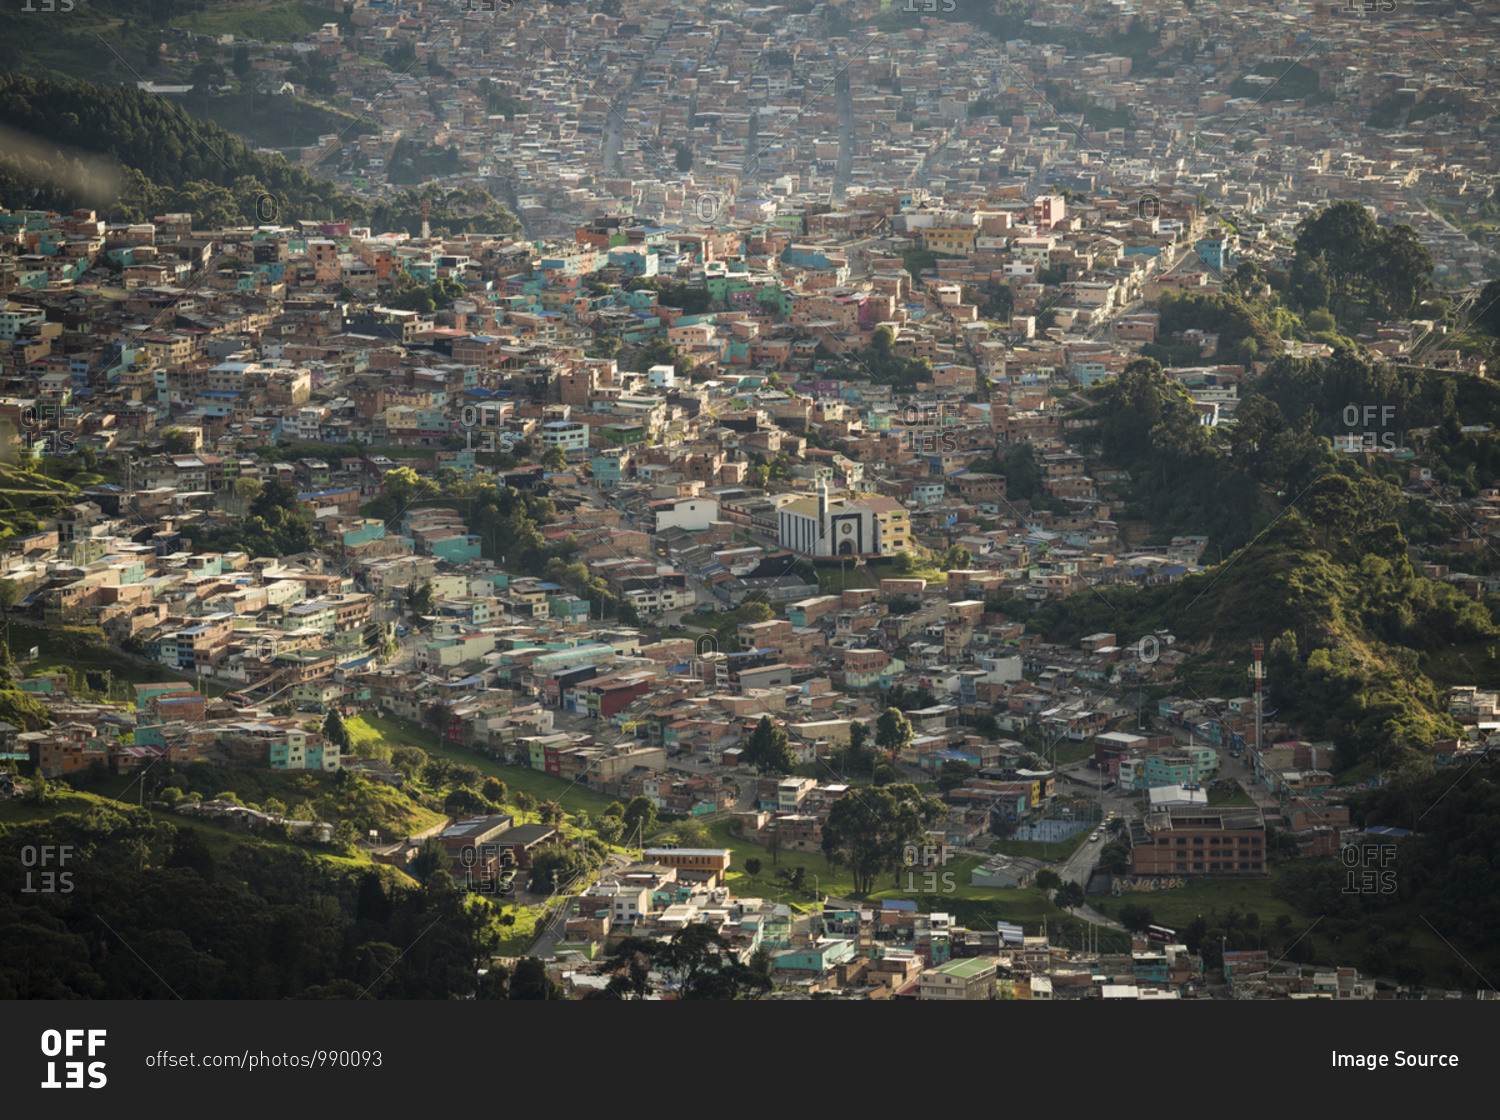 Elevated view of urban settlement, houses on the hillside and valley floor in mountains.